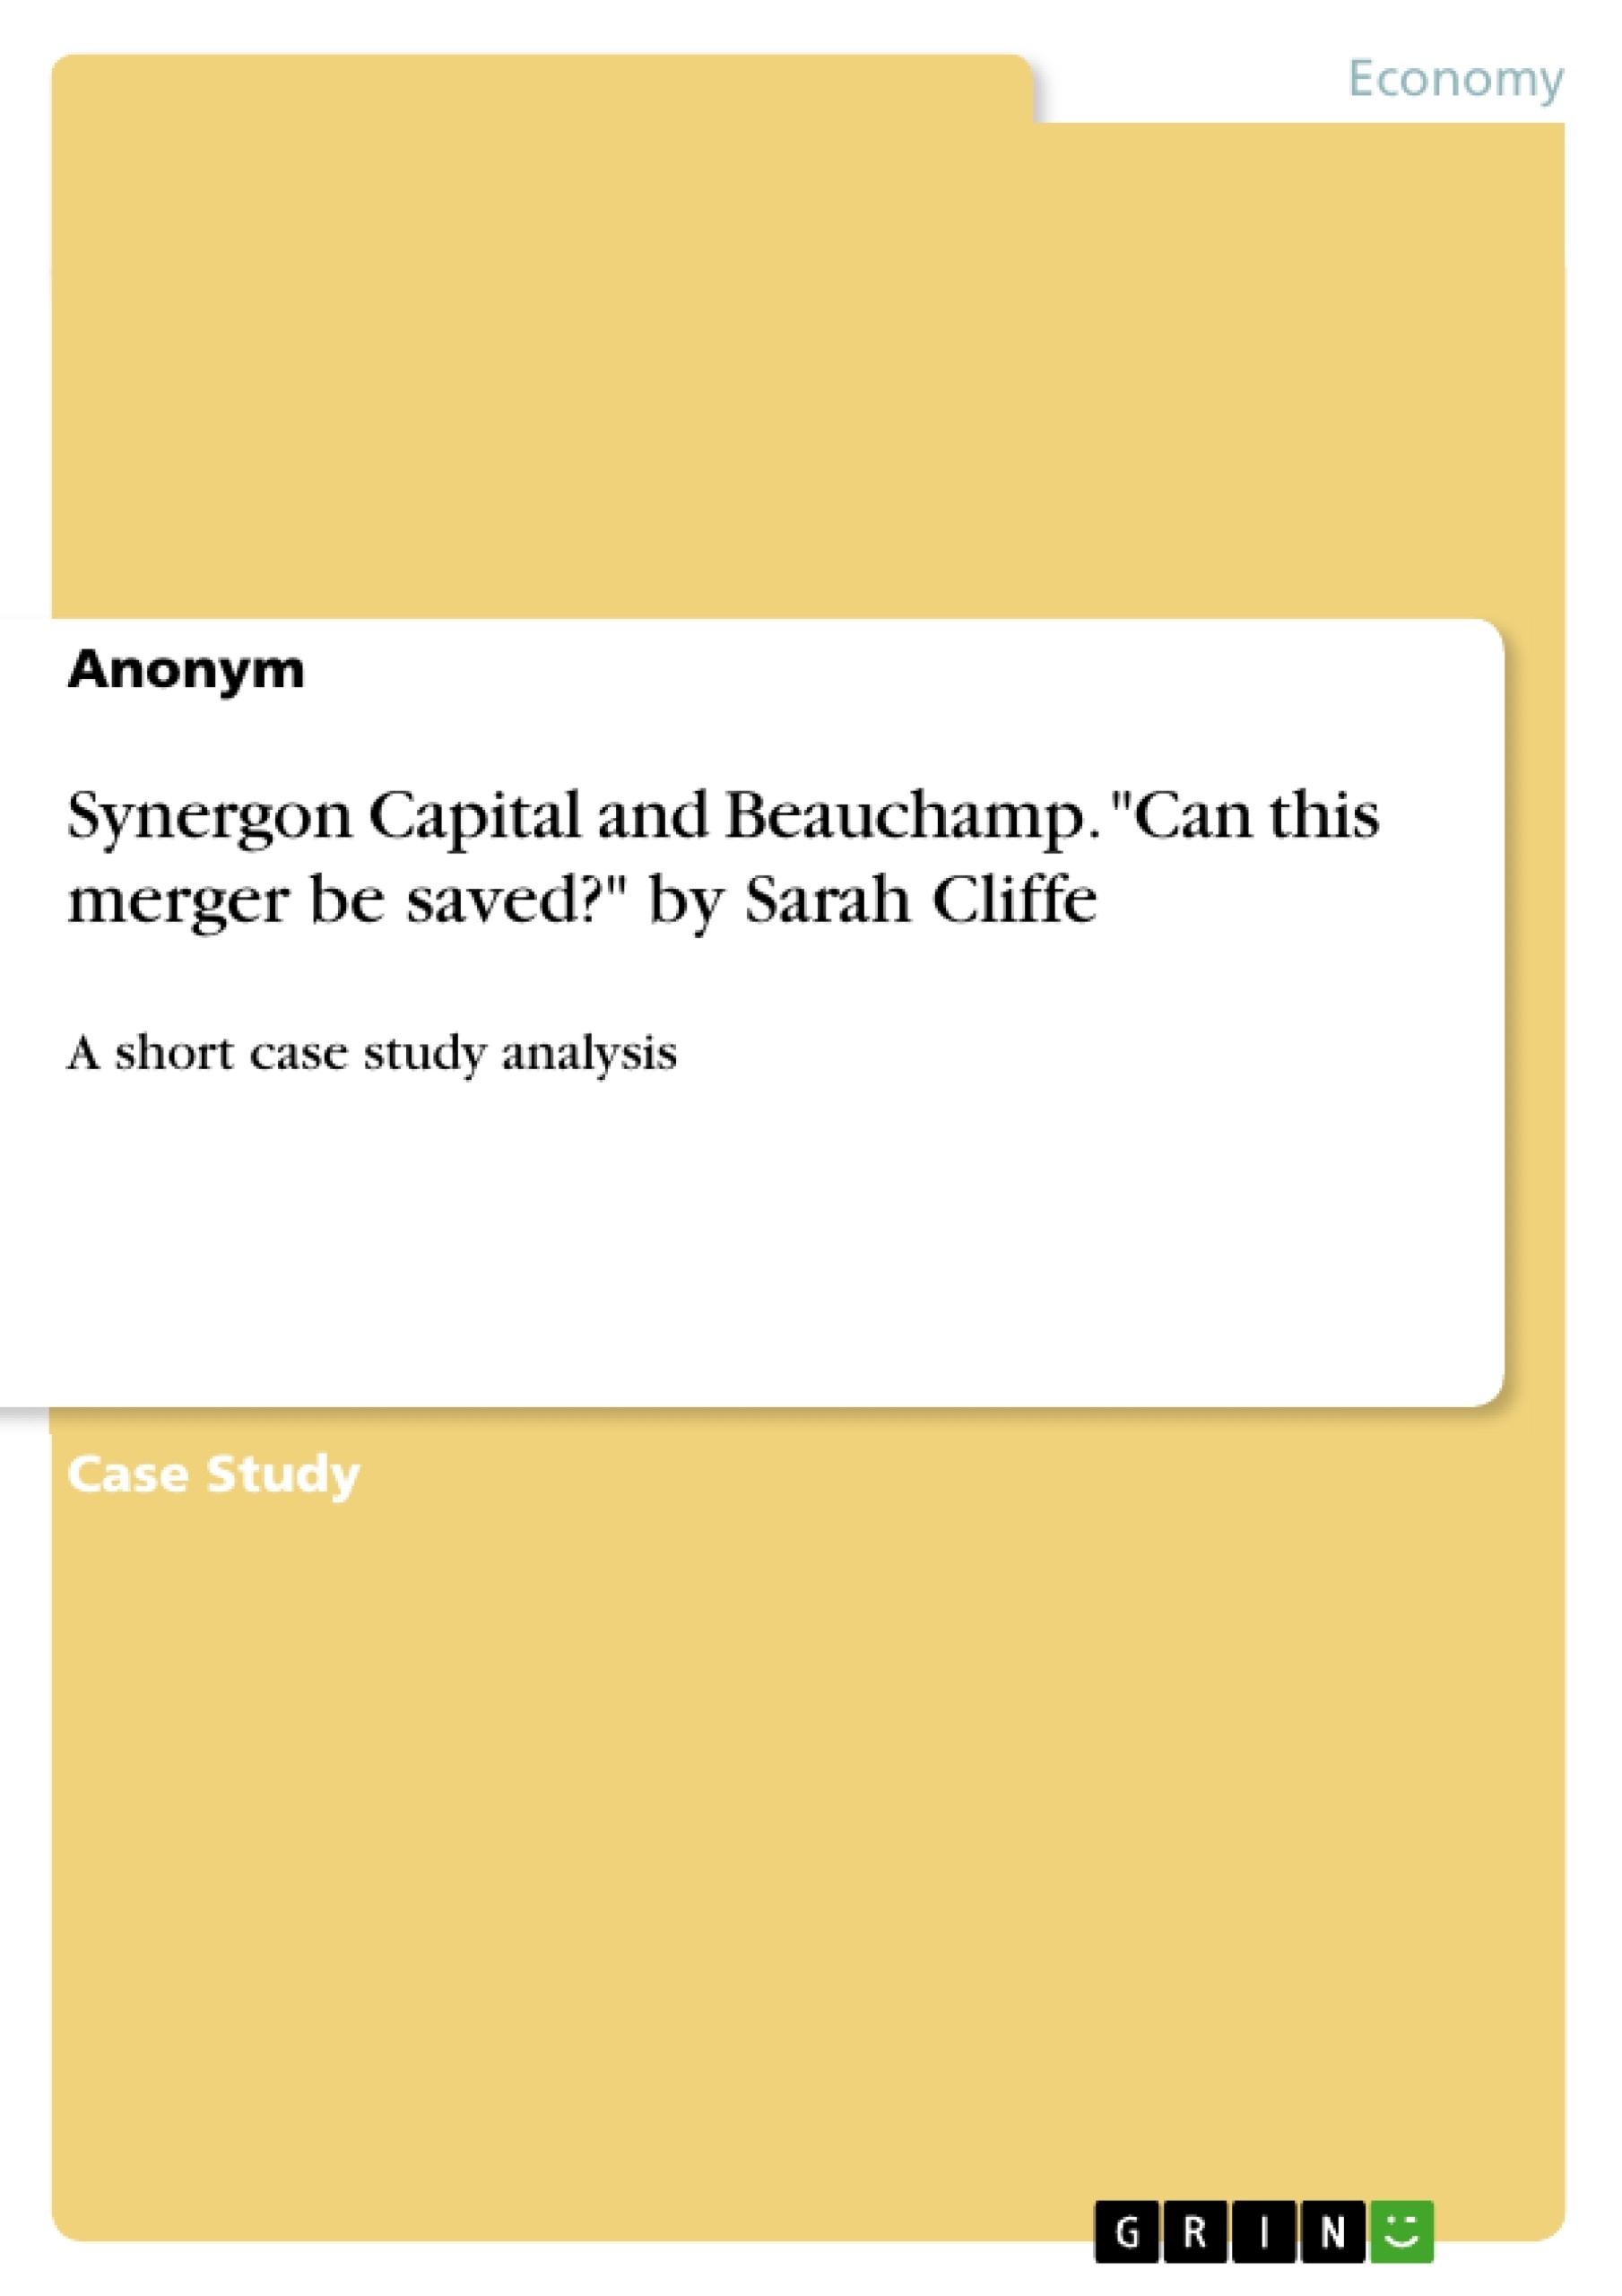 Title: Synergon Capital and Beauchamp. "Can this merger be saved?" by Sarah Cliffe